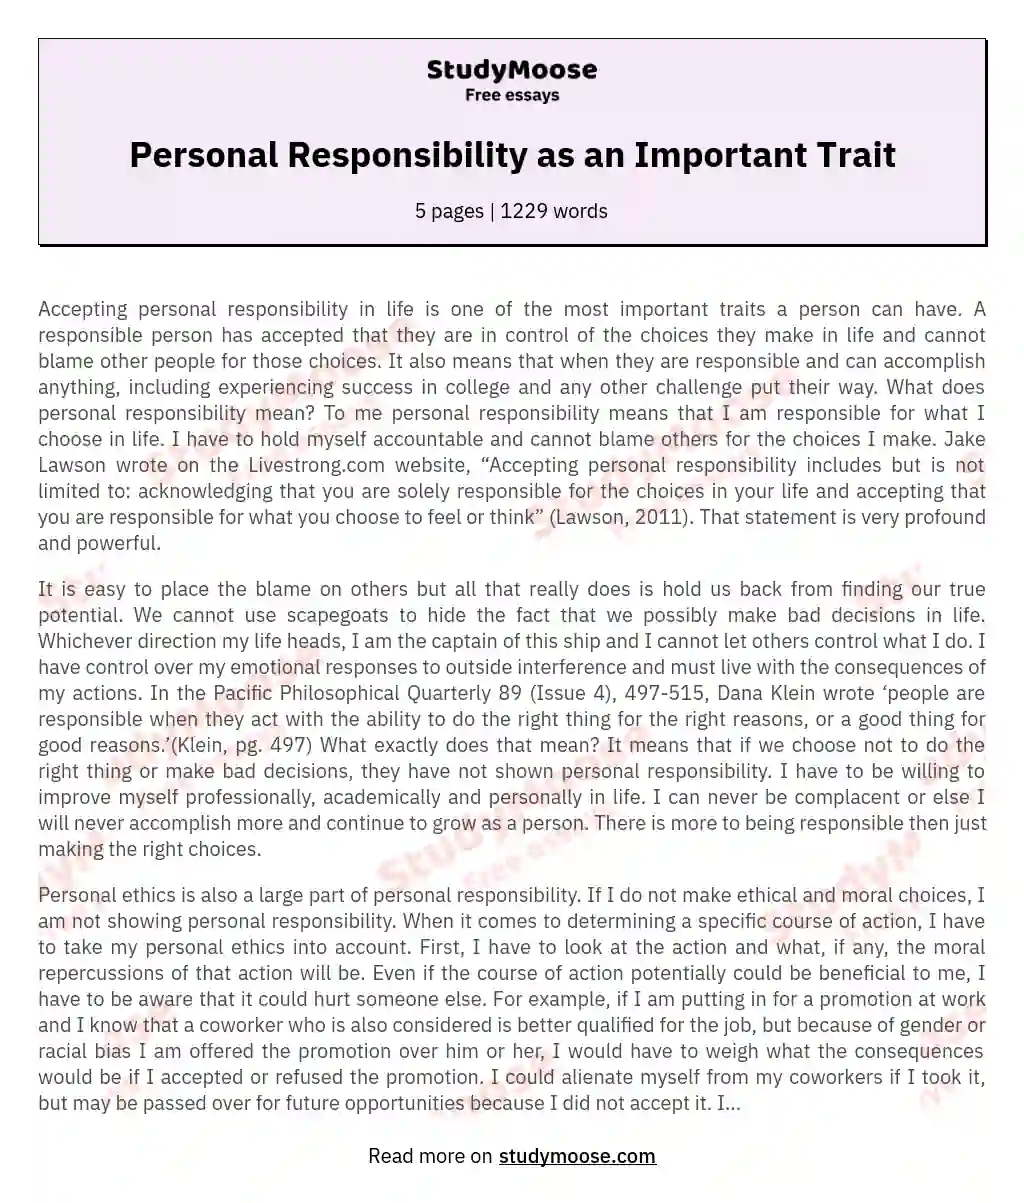 Personal Responsibility as an Important Trait essay